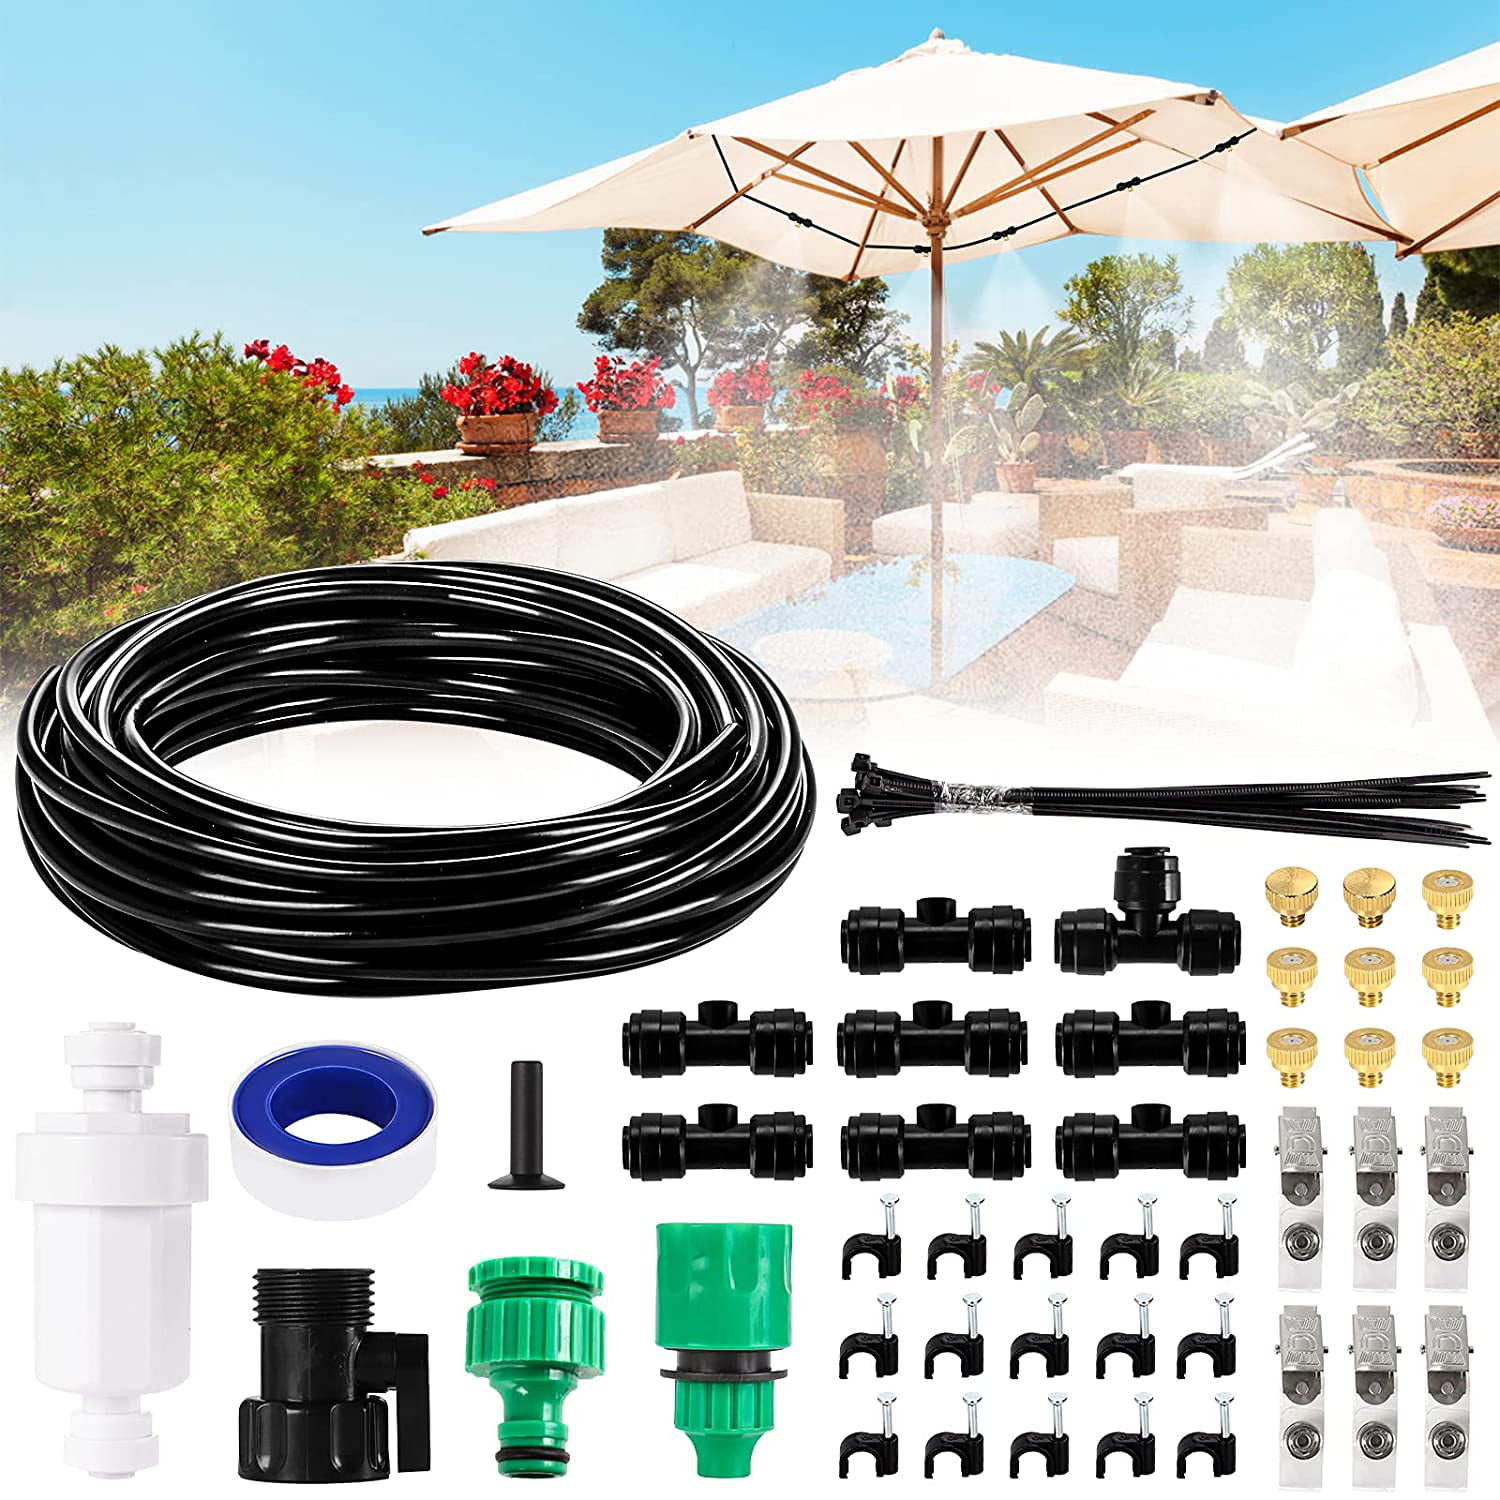 26.2FT Outdoor Mist Cooling System Misting Kit for Patio Garden Home Irrigations 